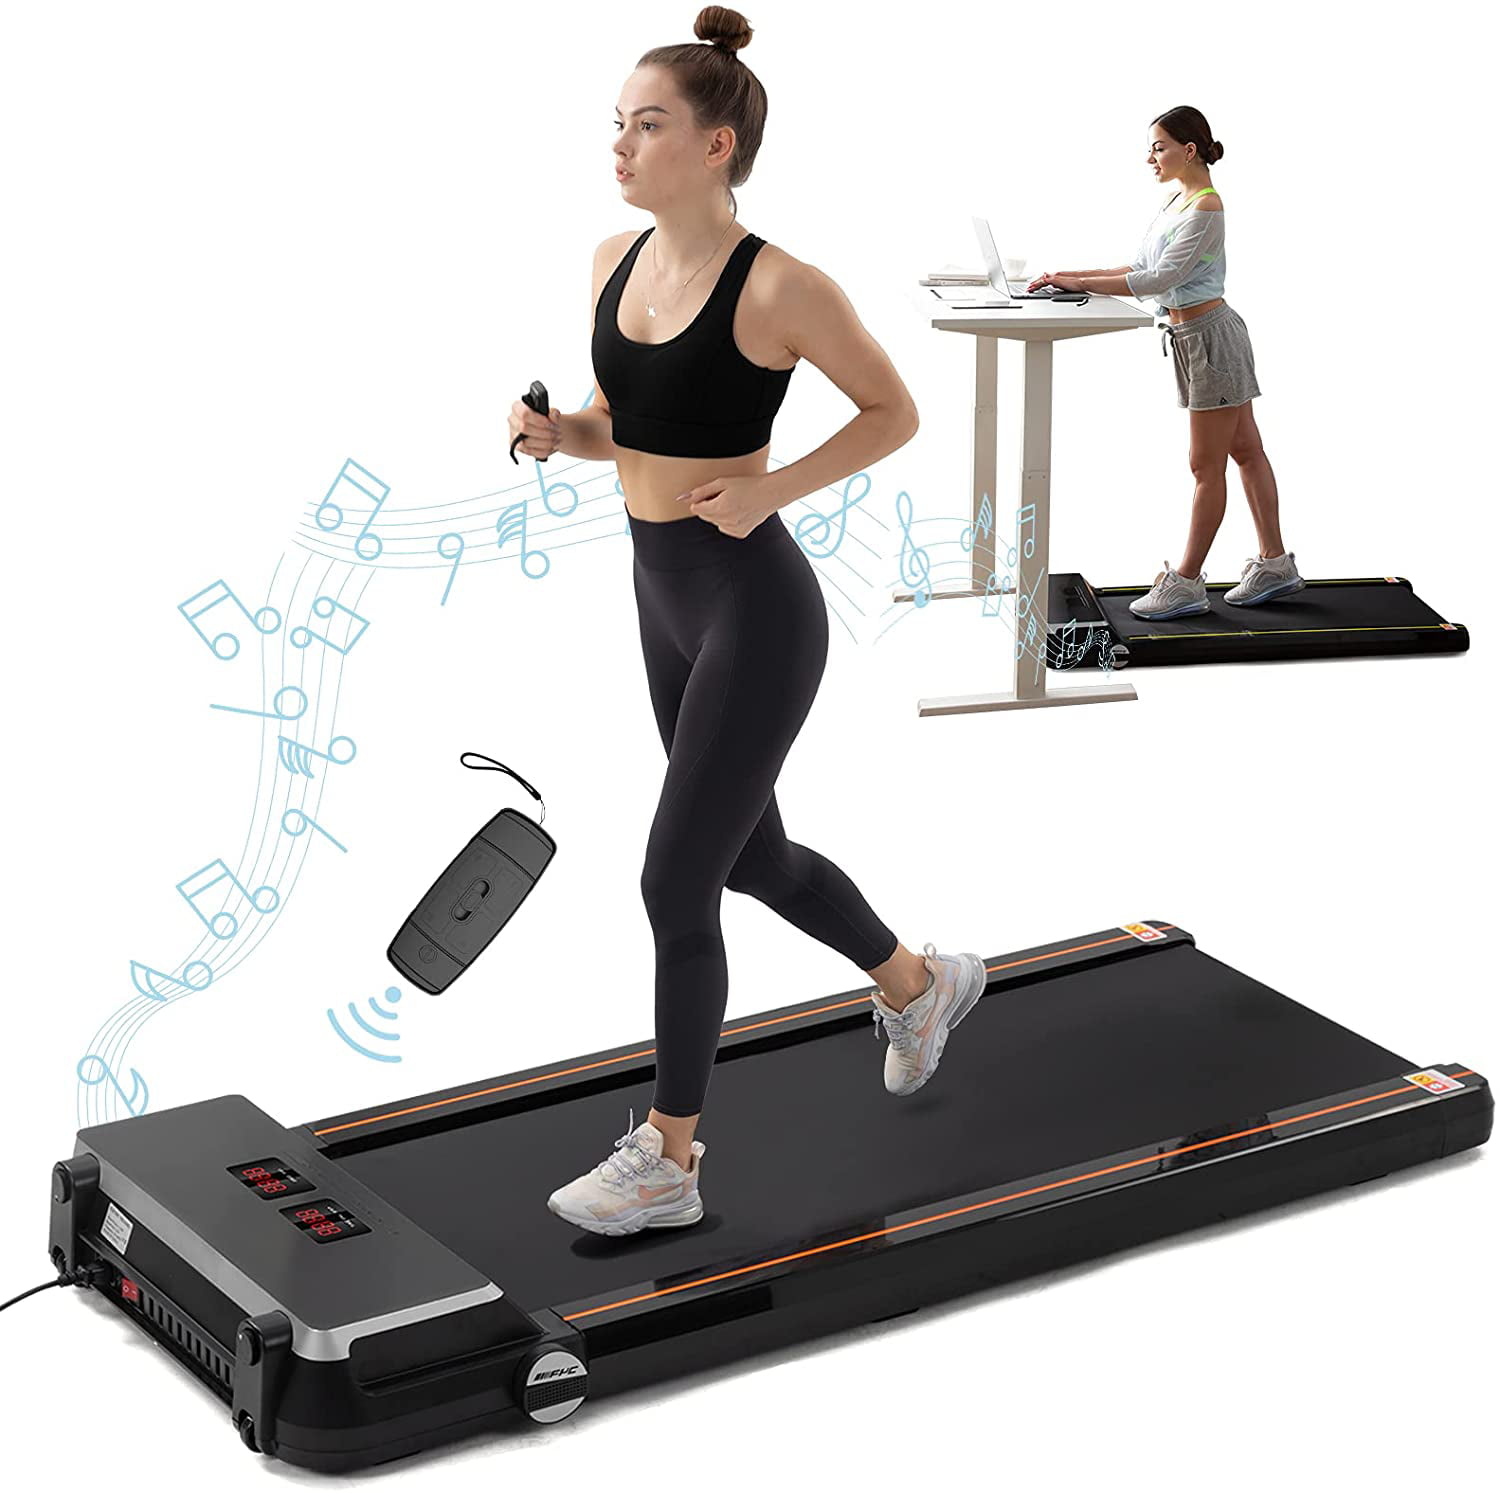 Installation-Free with Remote Control Jogging Walking Exercise Fitness Machine for Family & Office Use- 2022 Updated Version ANCHEER 2 in 1 Under Desk Treadmill APP Control and LED Display 